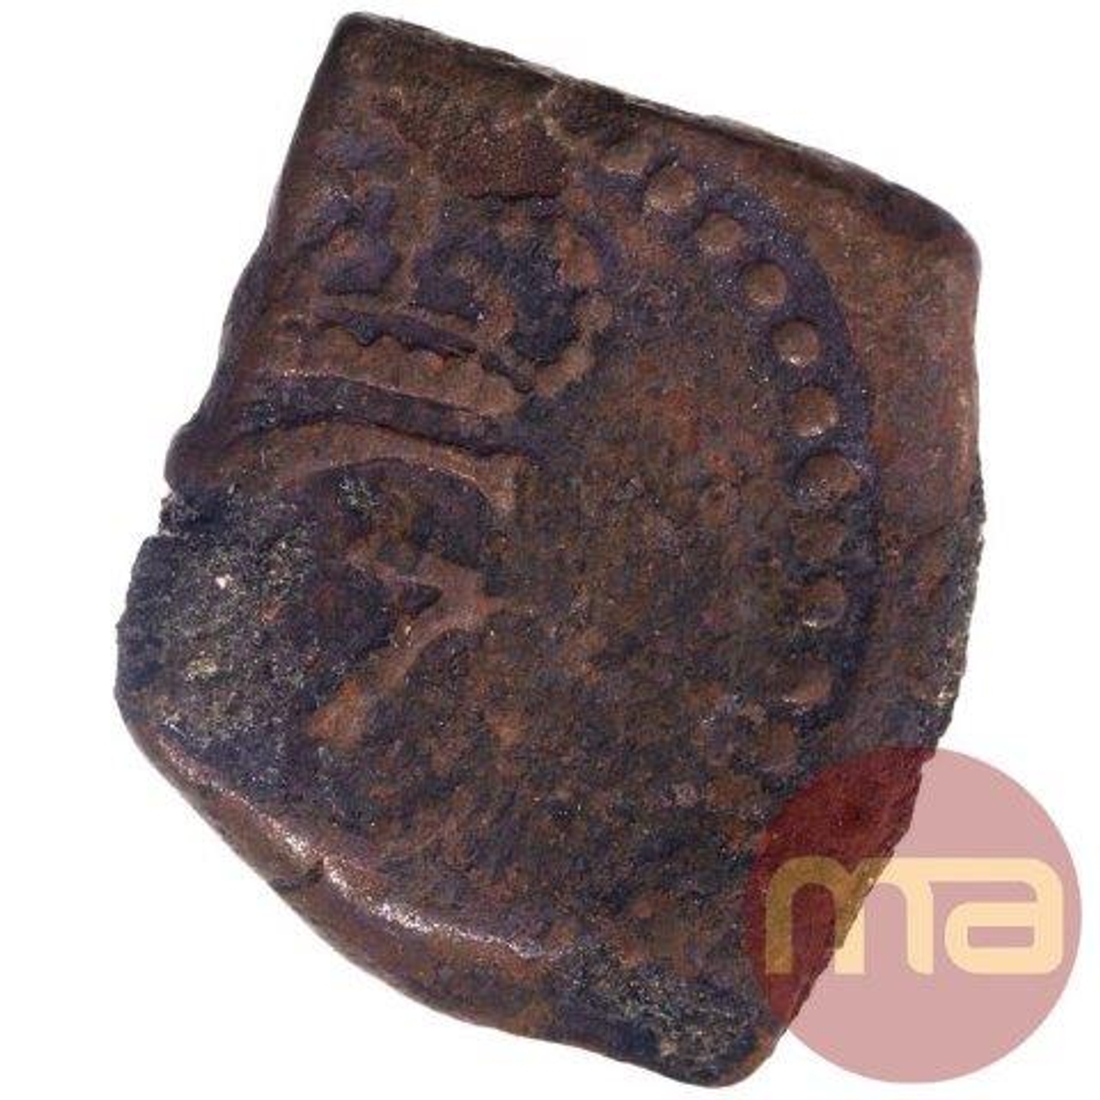 Copper Four Cash Coin of Christian VII of Indo Danish.